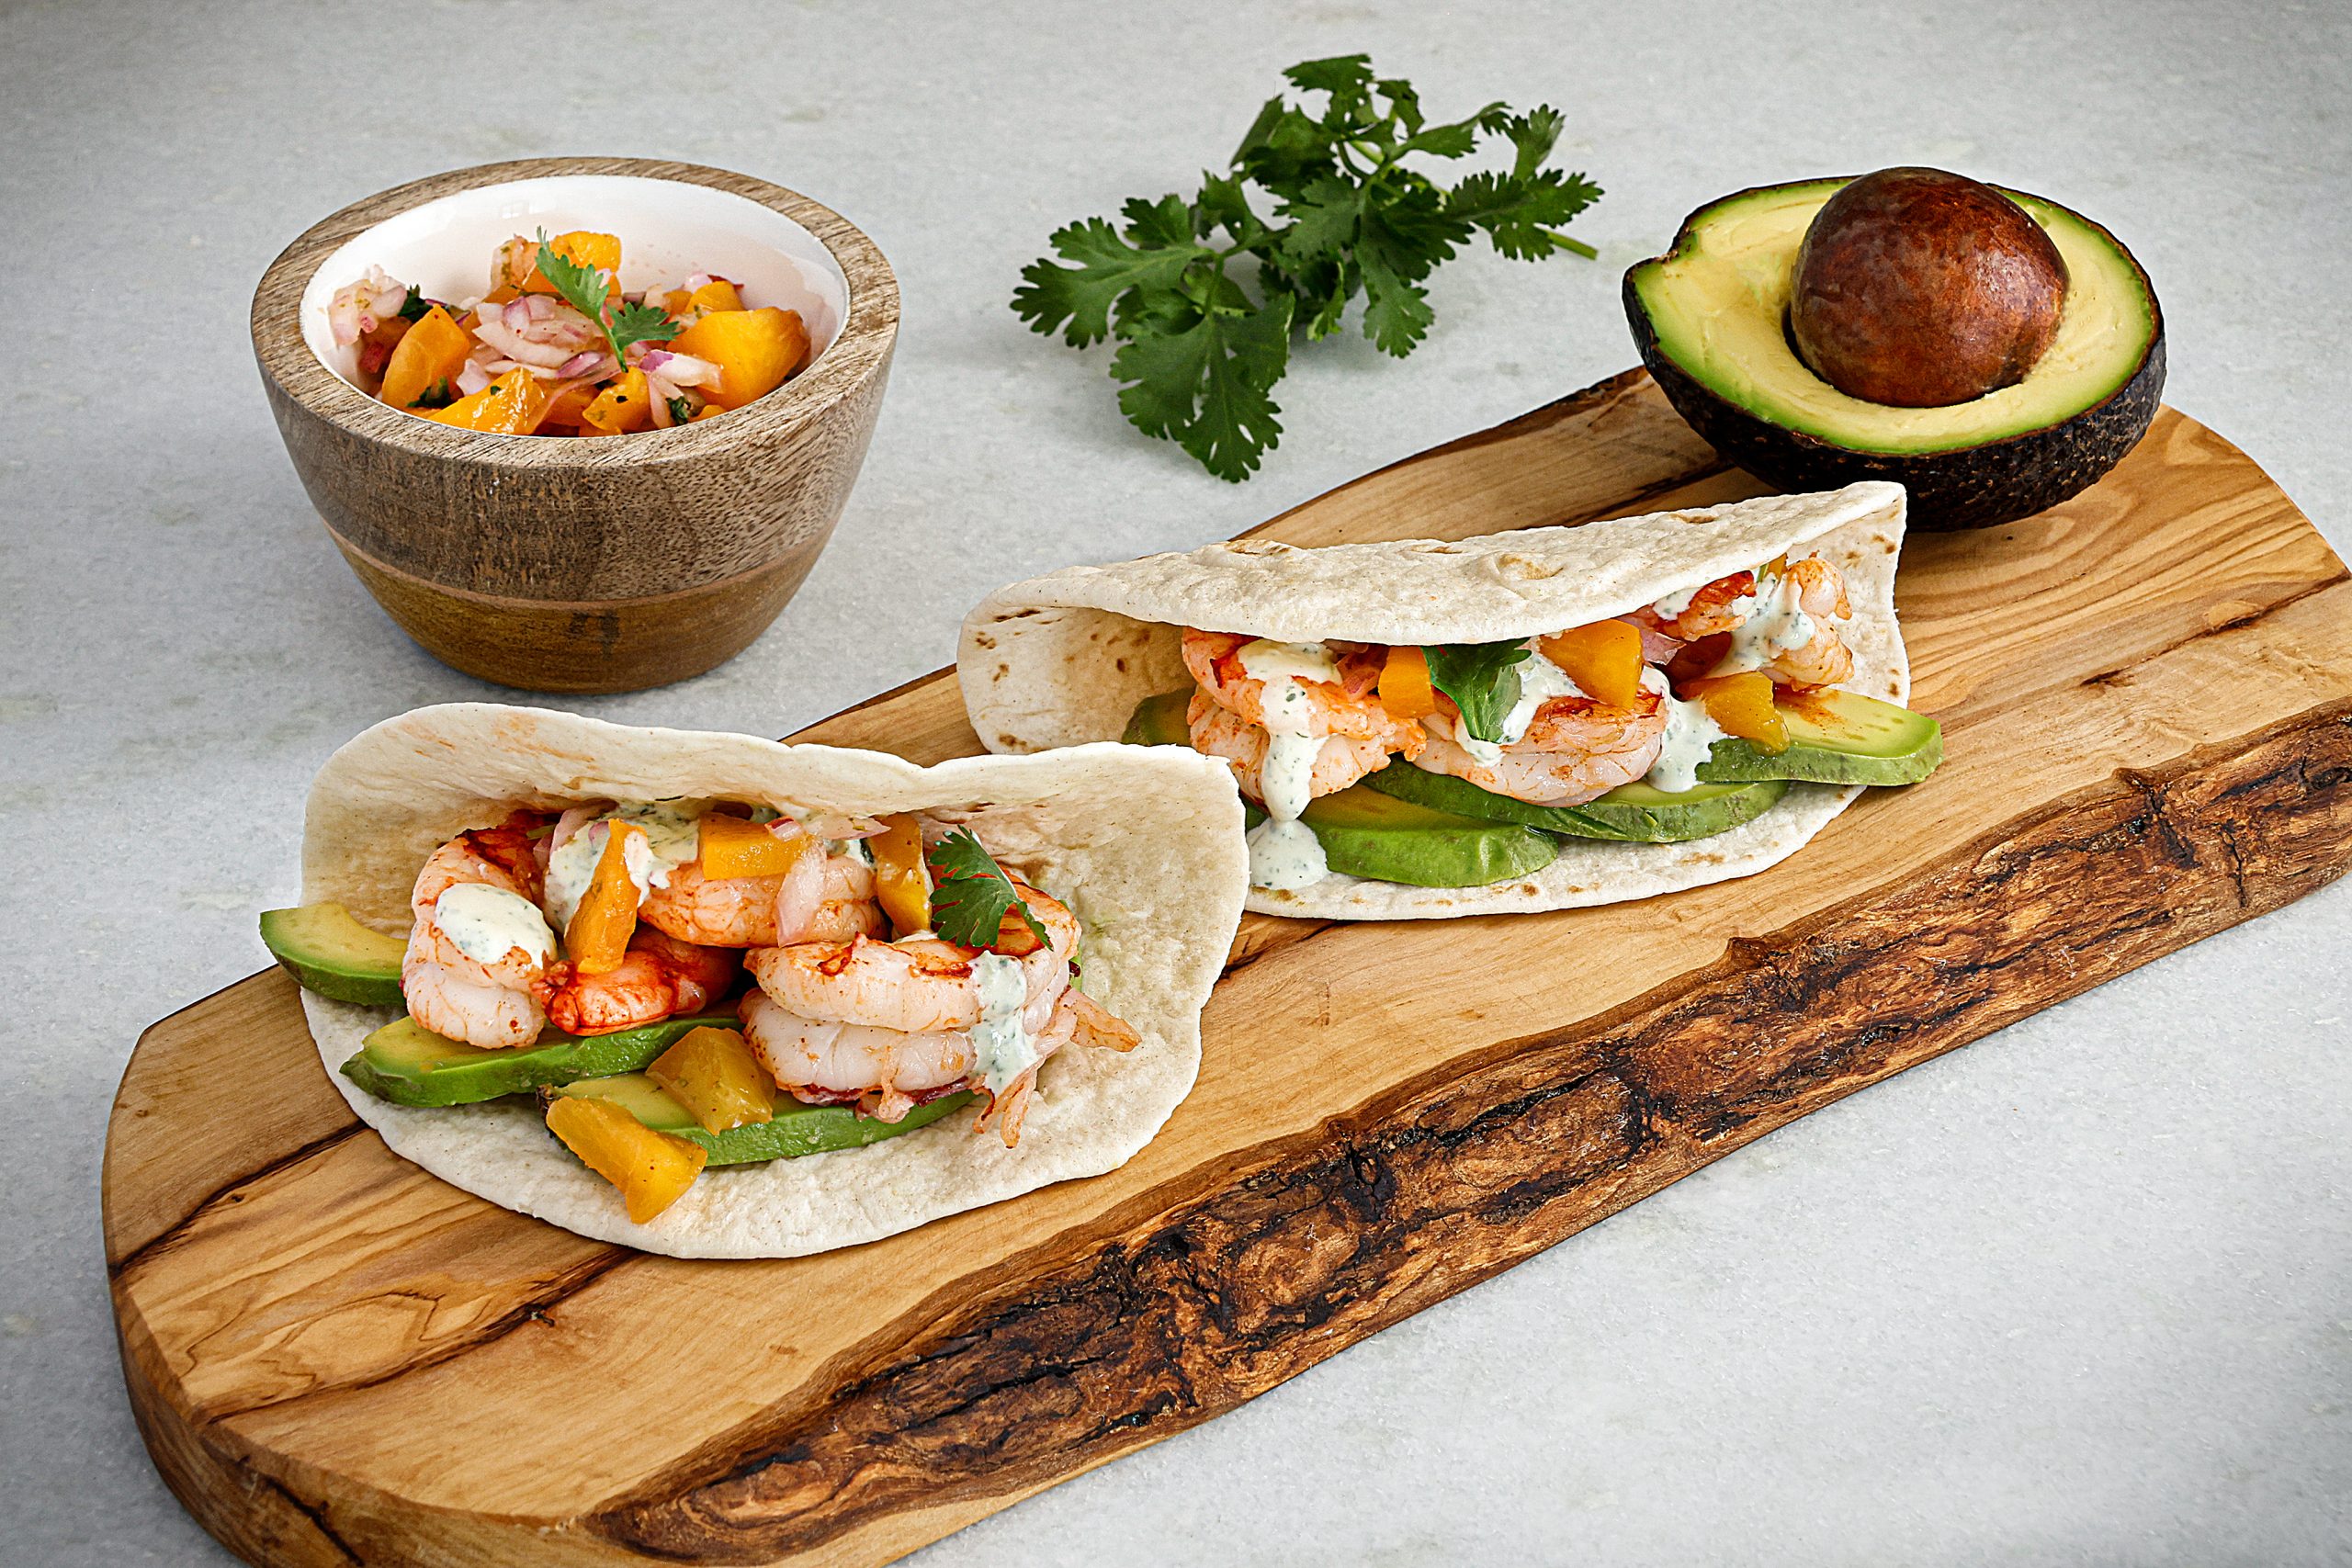 Full-on Summer Shrimp Tacos with Peach Salsa will be a fresh treat — keep the peach salsa under lock and key or it will magically disappear! BH mango & white enamel bowl courtesy of Kudzu Bakery & Market